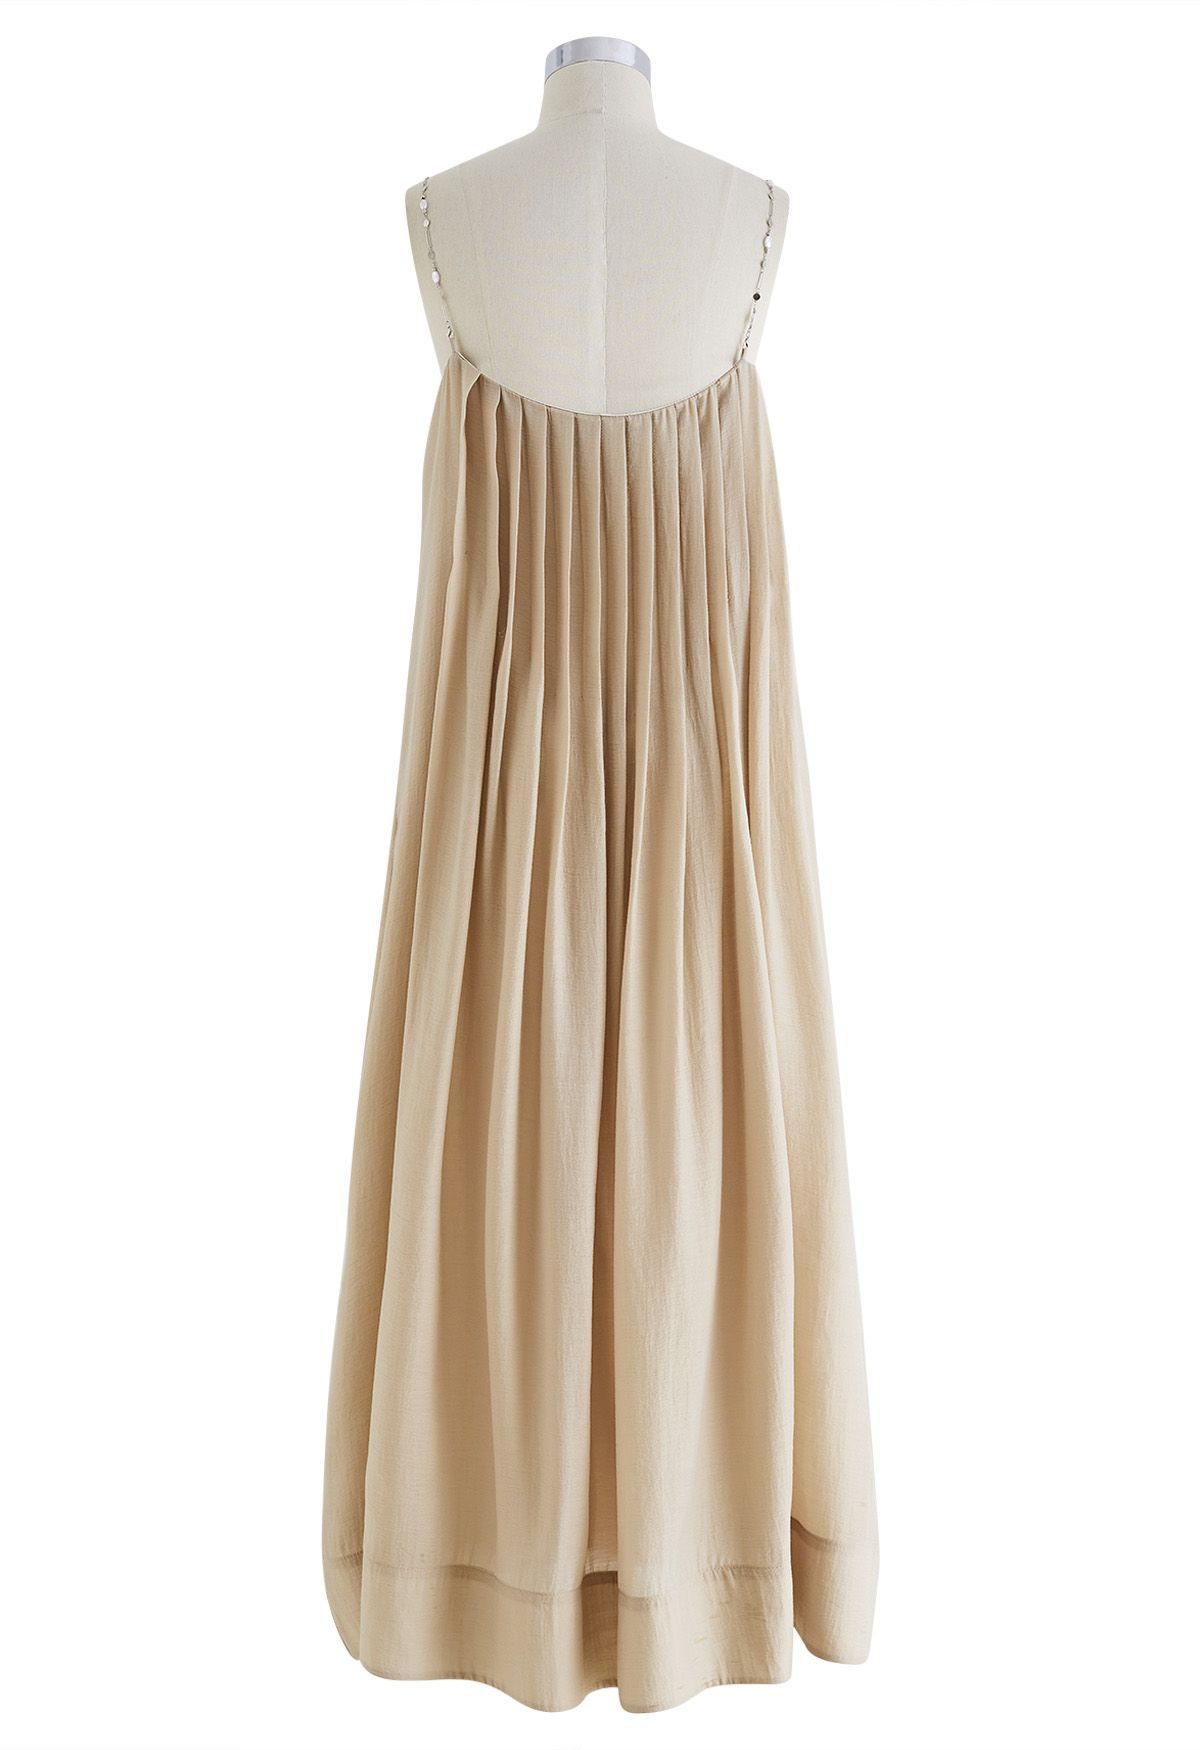 Breezy Pleated Chain Cami Maxi Dress in Light Tan - Retro, Indie and ...